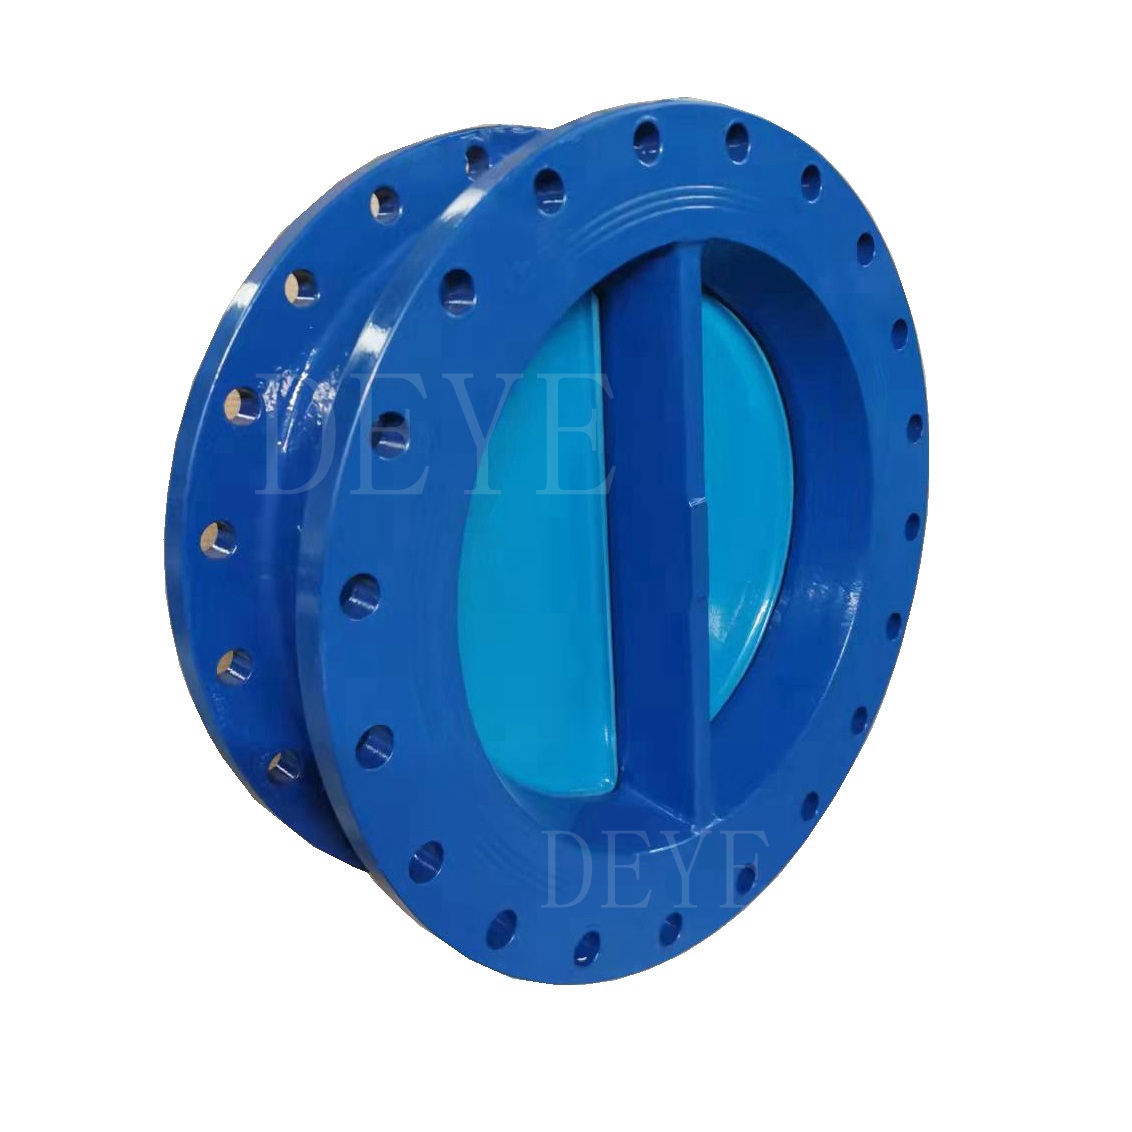 wafer double flanged check valve 